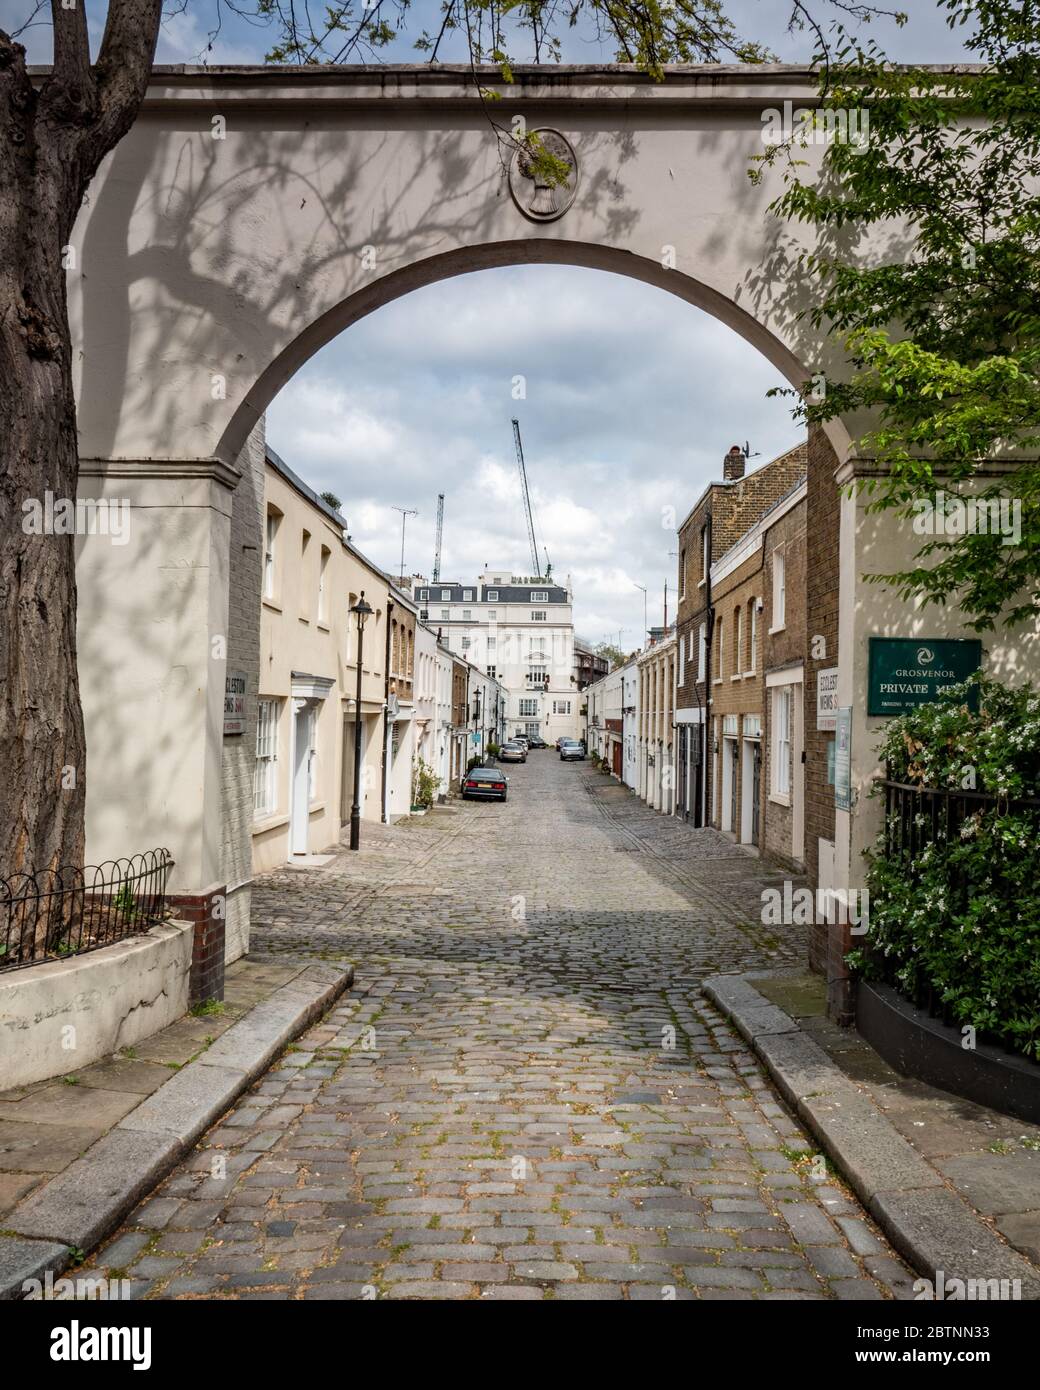 Eccleston Mews, Belgravia, London SW1. The cobbled backstreets were originally homes for stables but have since become desirable residential areas. Stock Photo